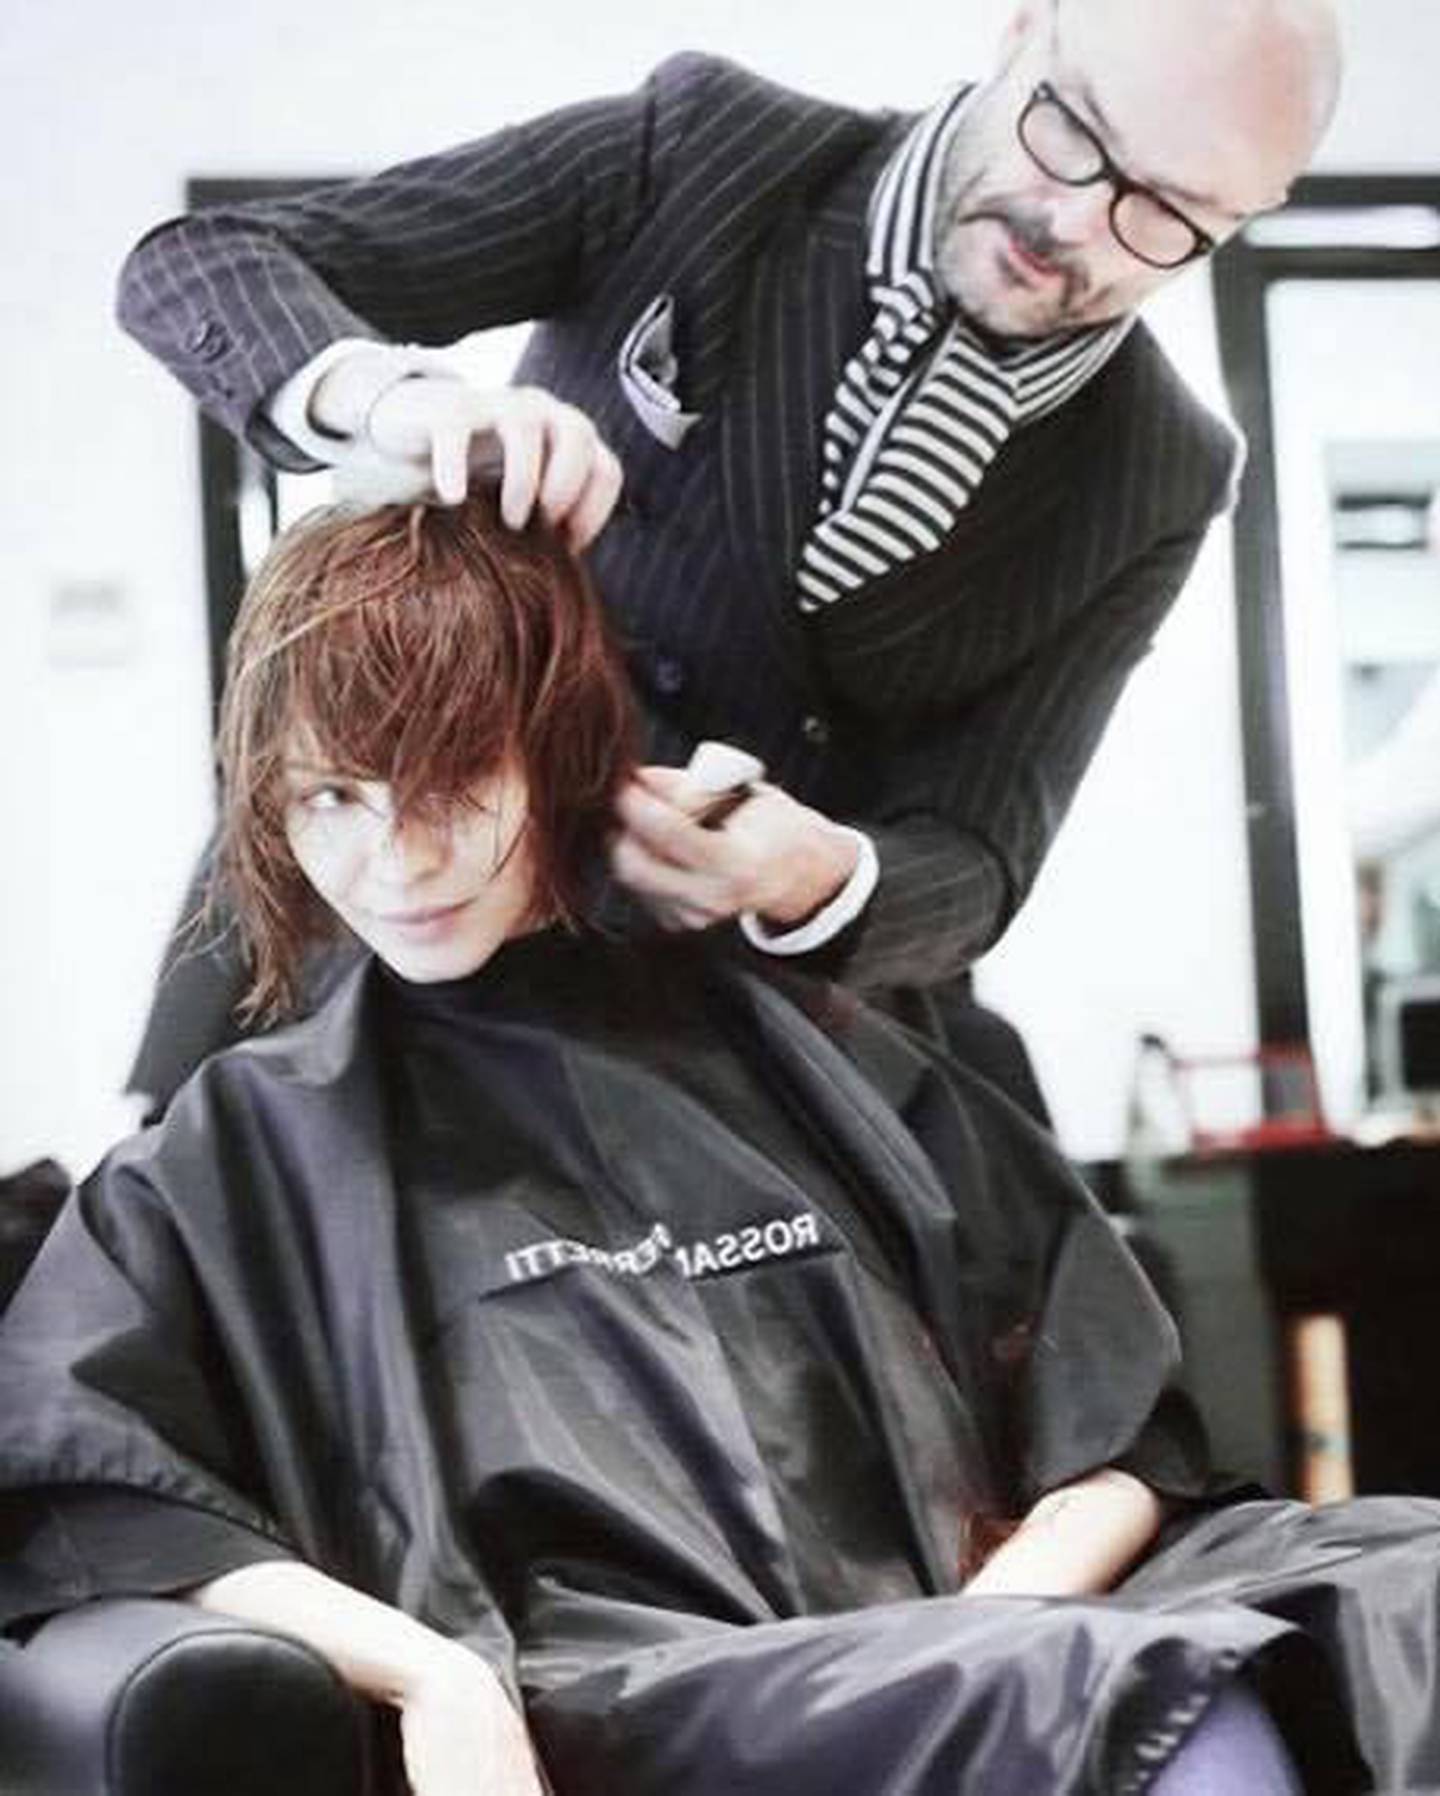 Ferretti respects the natural movement of the hair